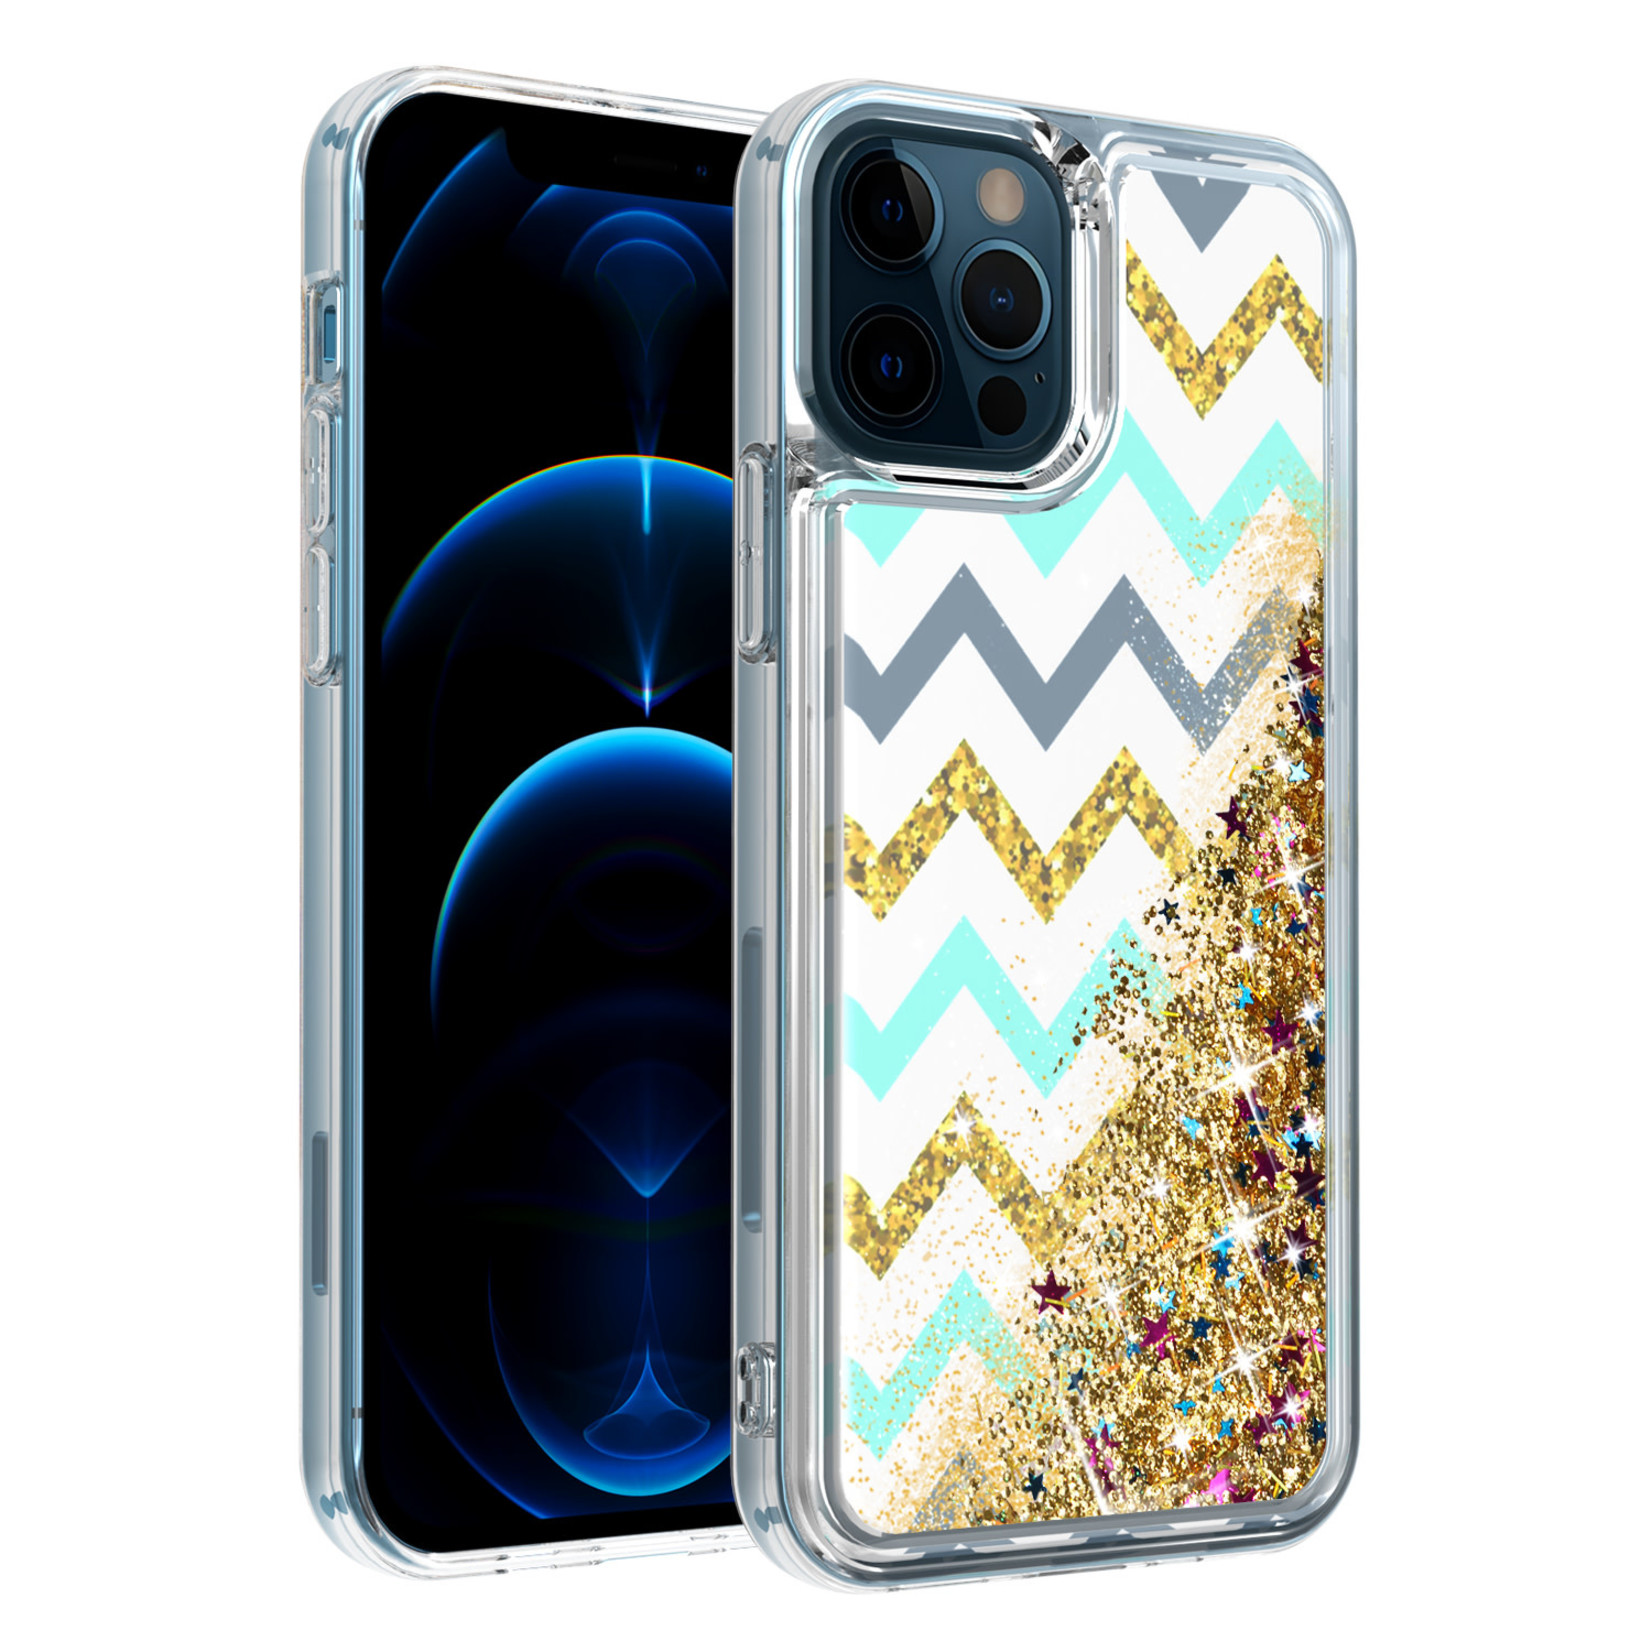 KaseAult Liquid Quicksand Glitter Cover Case - Teal Gold ZigZag For iPhone 13 6.1